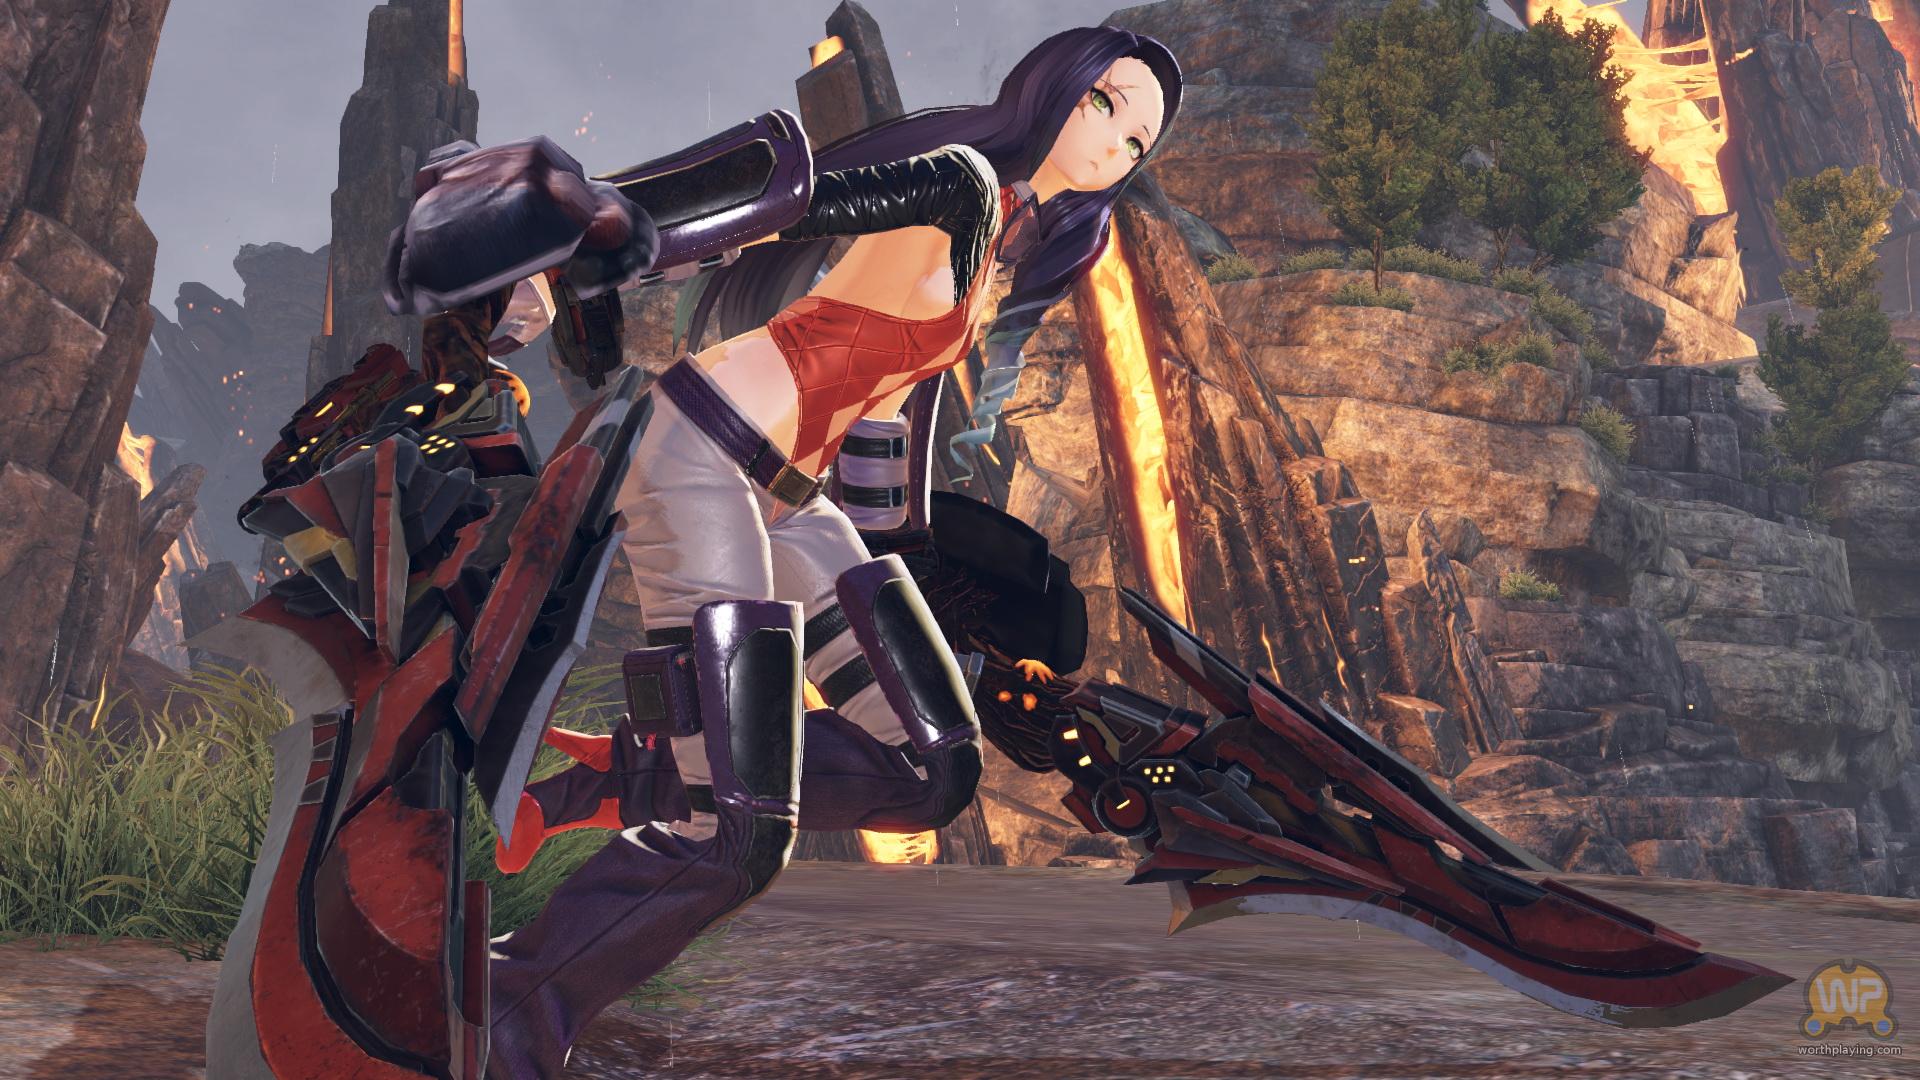 New Story And Character Details Announced For God Eater 3